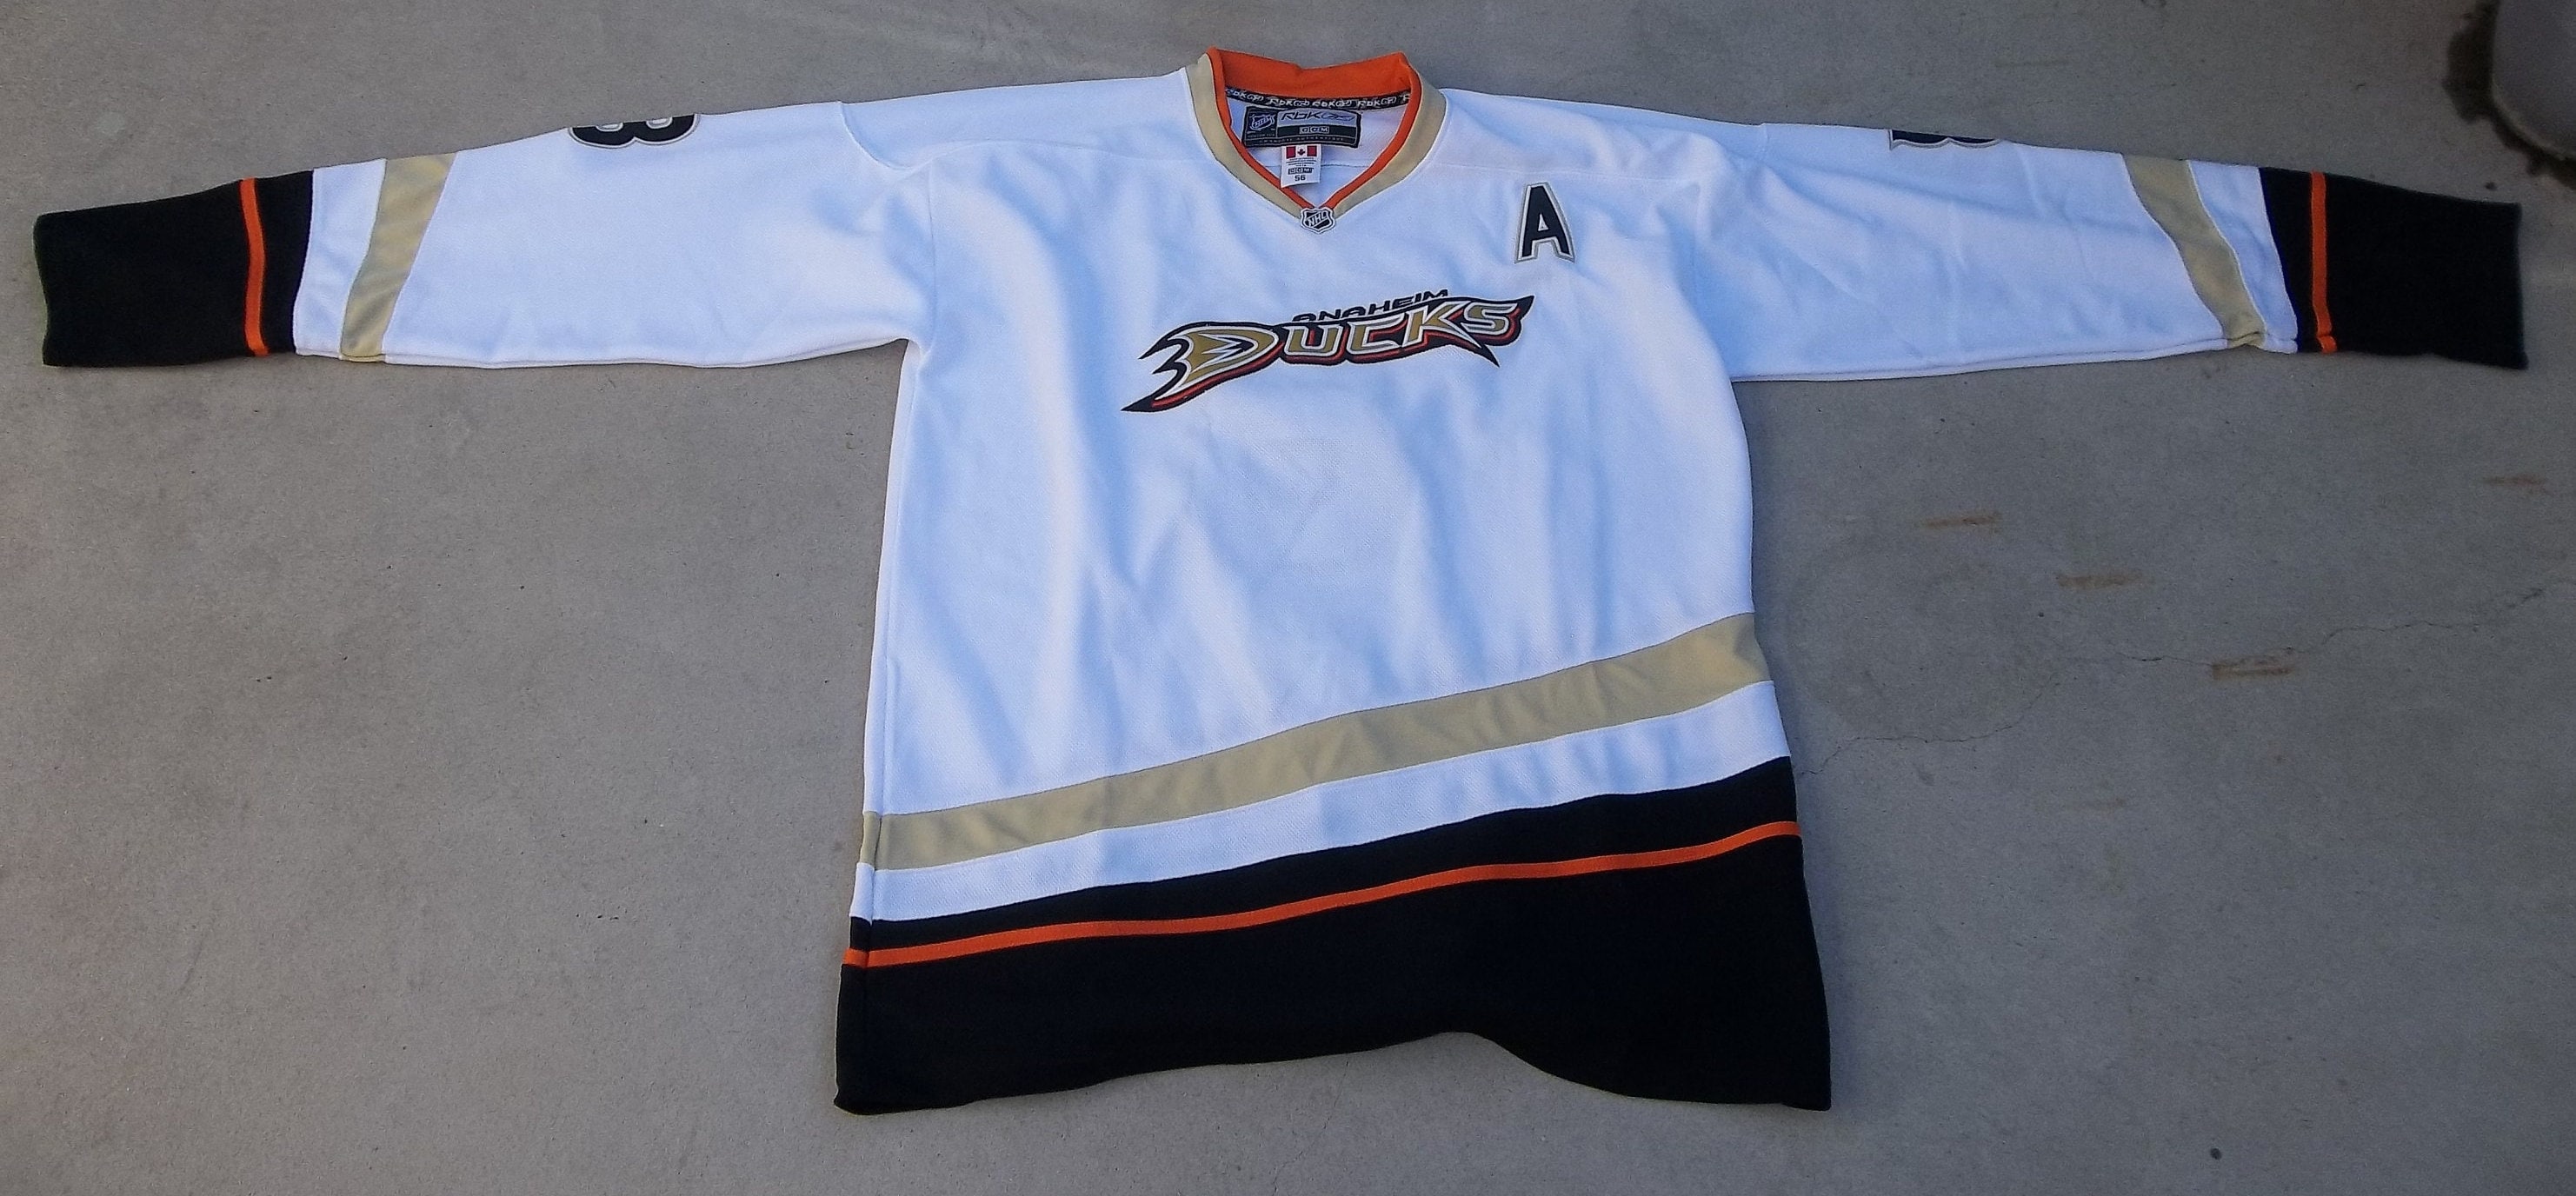 angels ducks jersey for sale, Off 73%